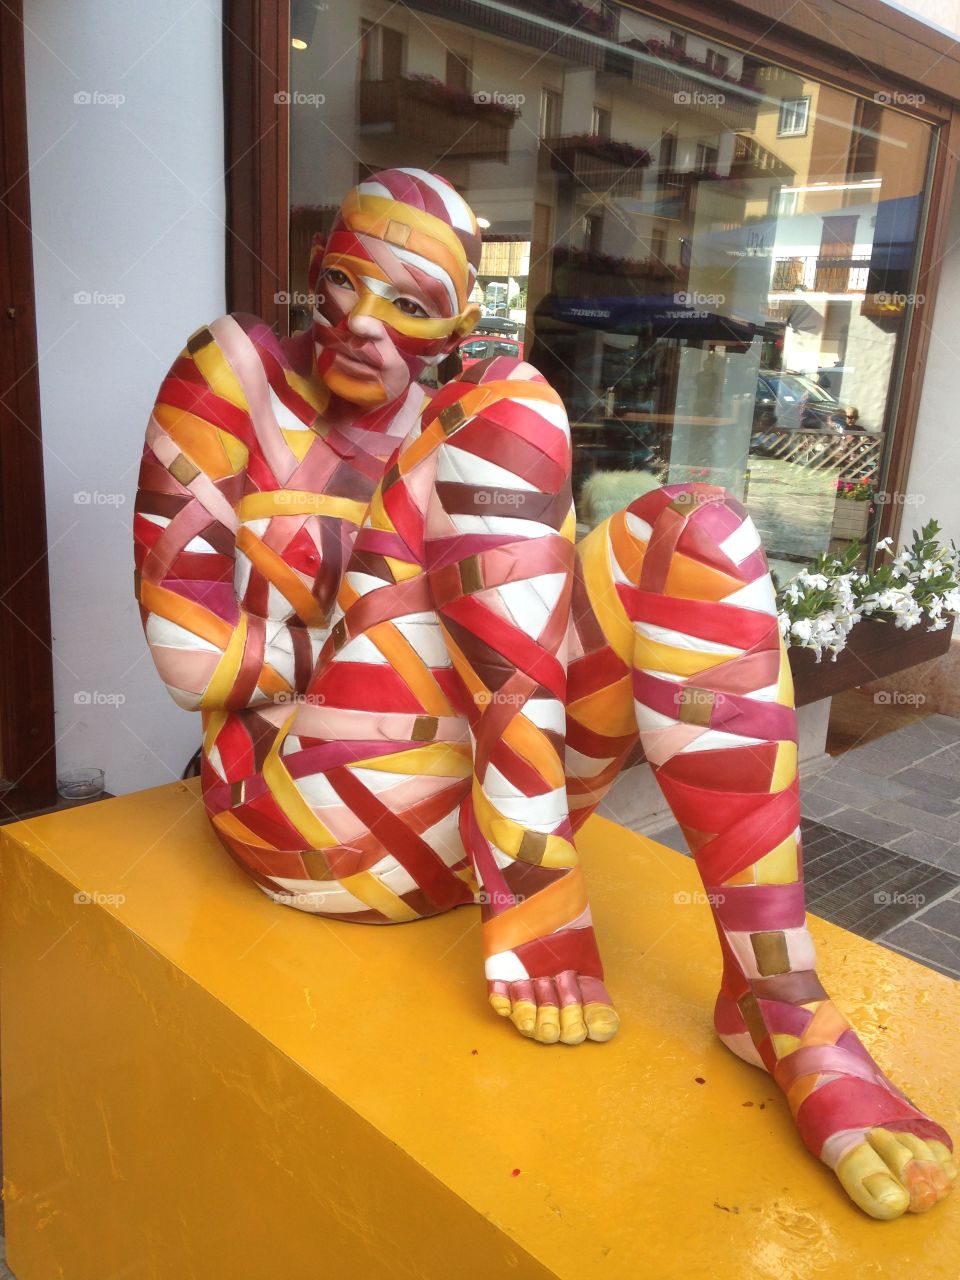 Colorful wrapped person sitting on bench